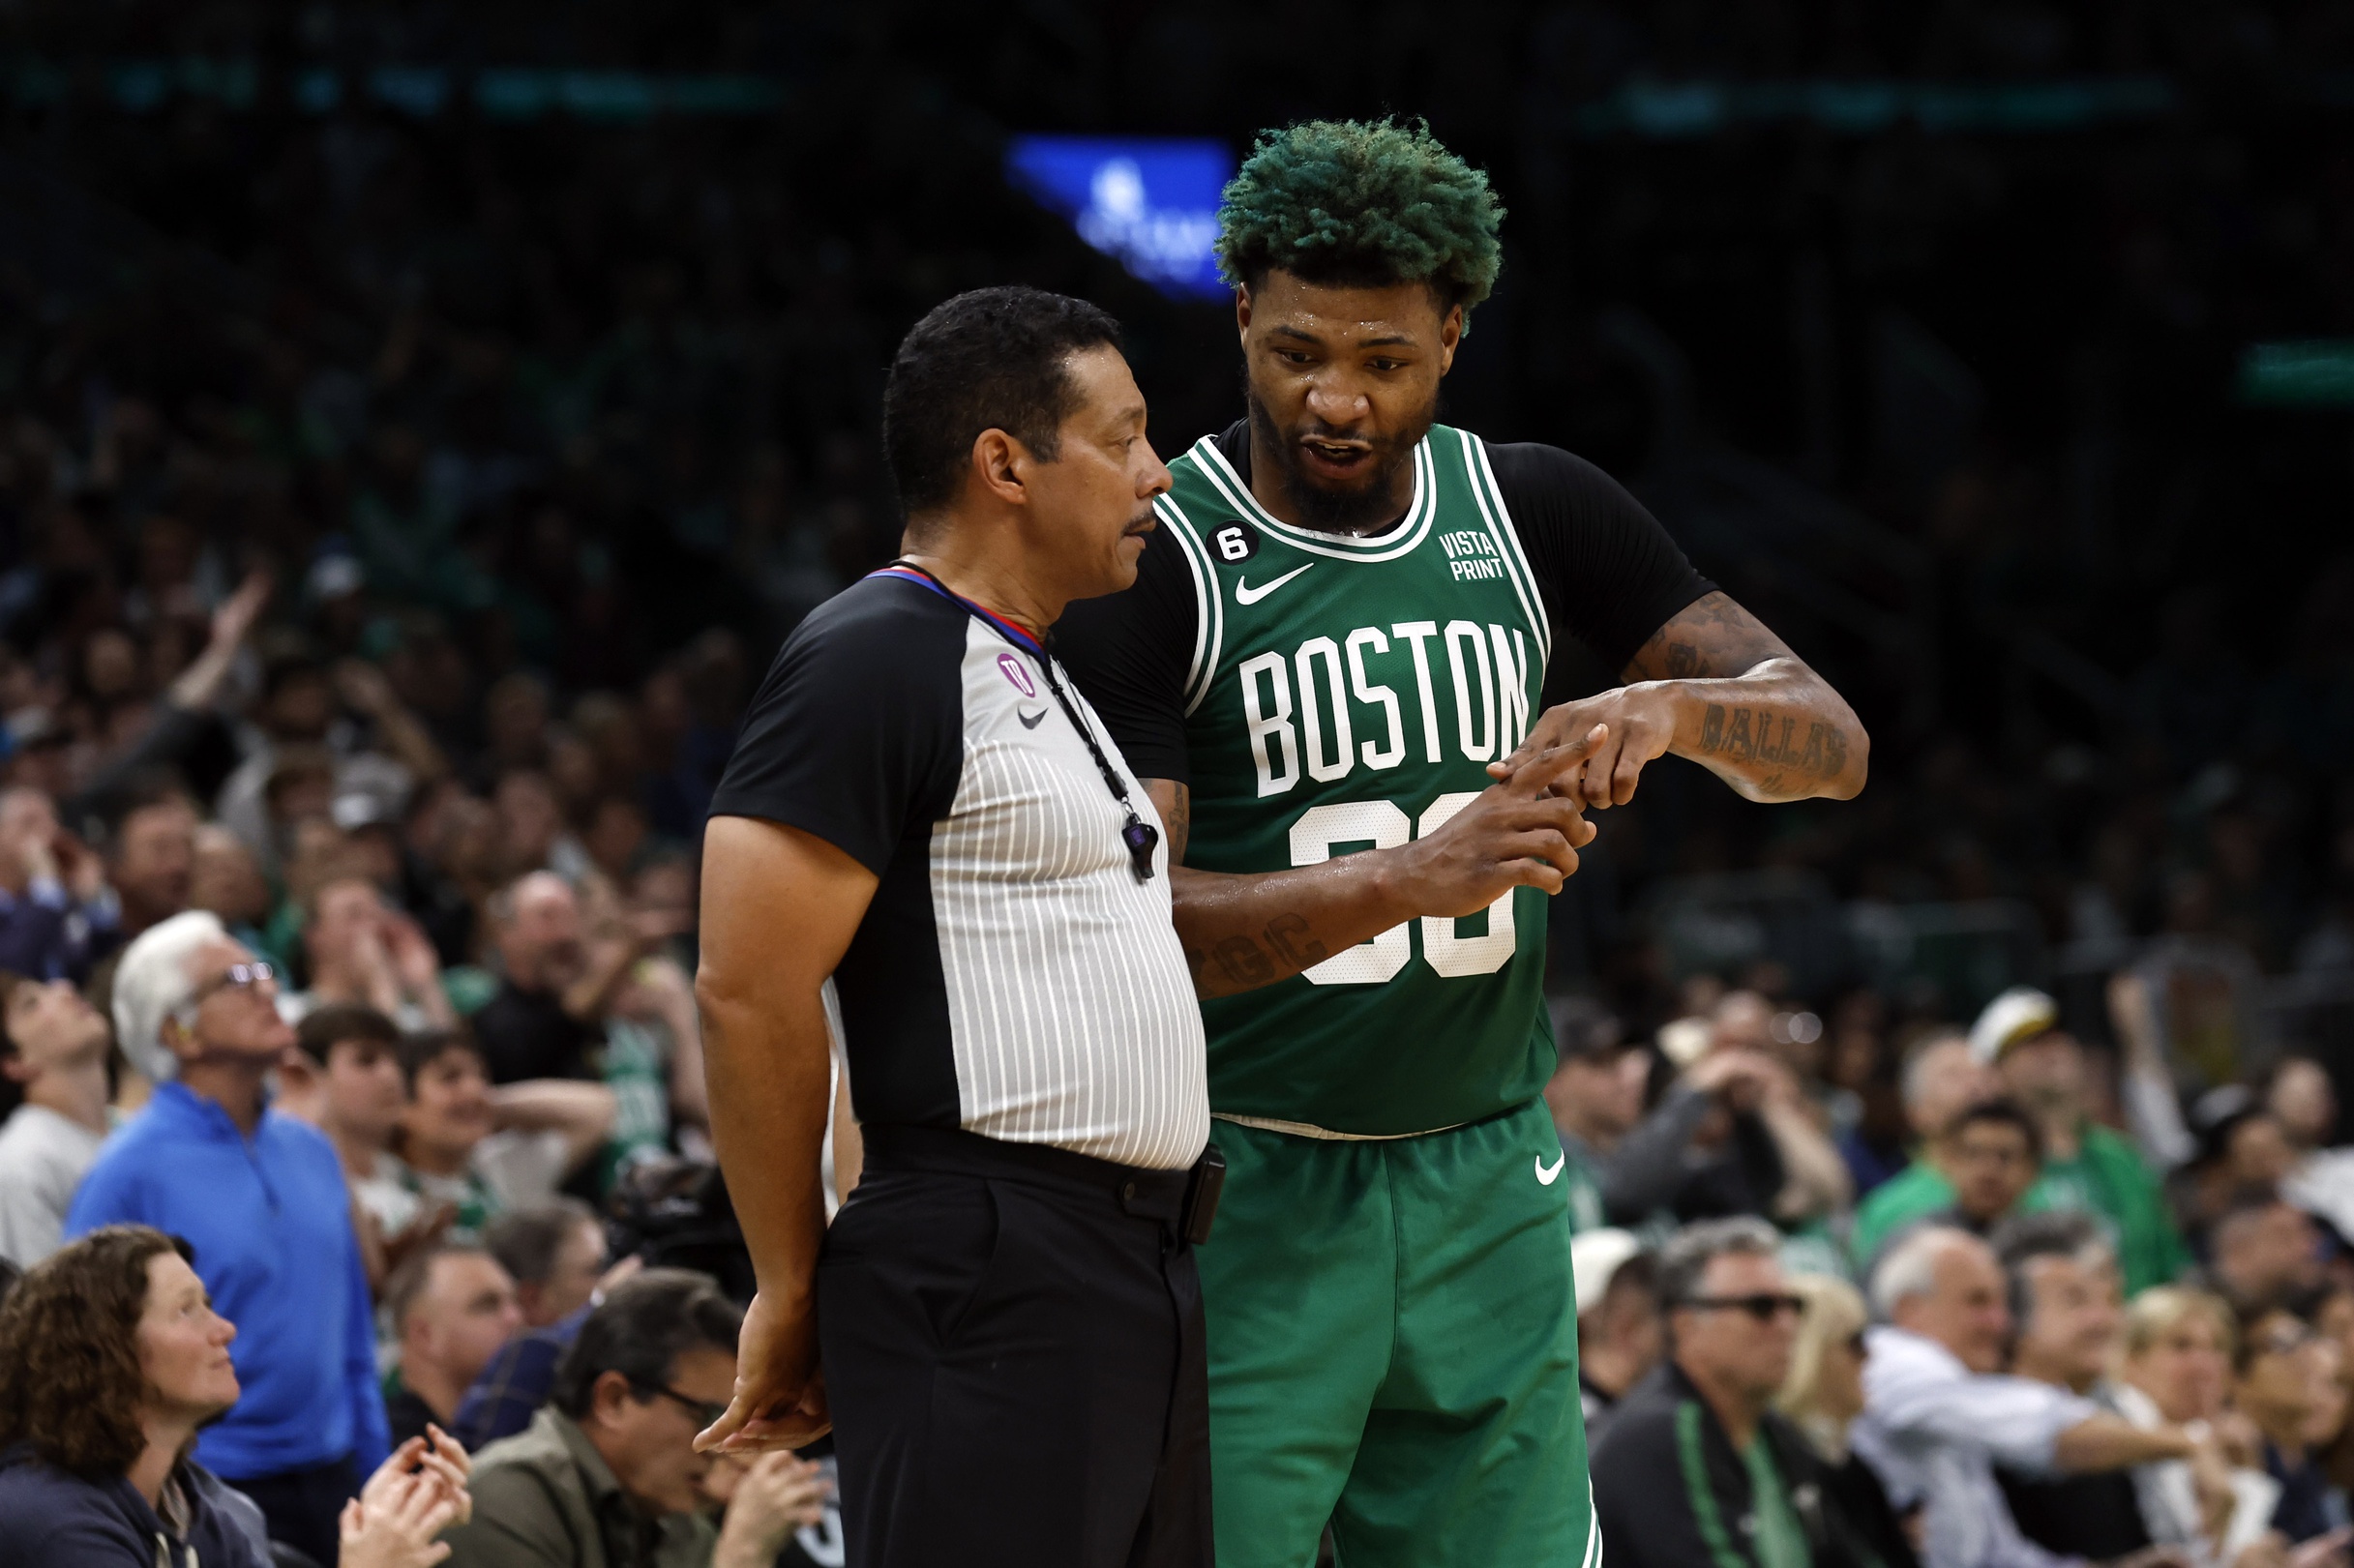 May 25, 2023; Boston, Massachusetts, USA; Boston Celtics guard Marcus Smart (36) talks to an official during the second quarter against the Miami Heat in game five of the Eastern Conference Finals for the 2023 NBA playoffs at TD Garden. Smart is known as one of the most frequent culprits of flopping, a rule the NBA Board of Governors looks to handle this season. Mandatory Credit: Winslow Townson-USA TODAY Sports